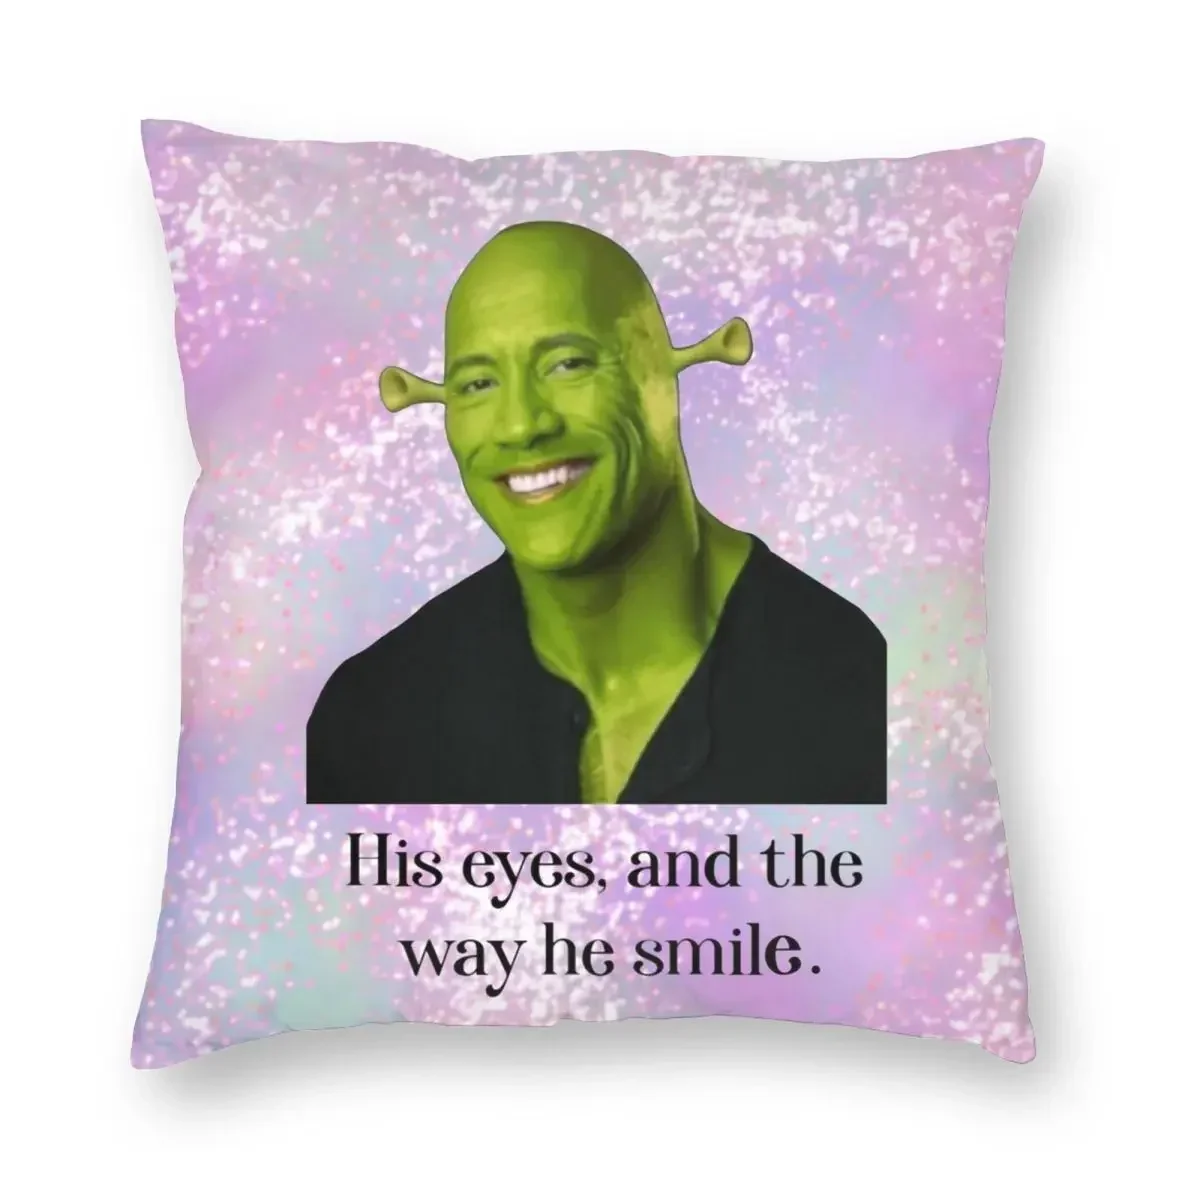 

The Shrock Dwayne Meme Pillowcase Printed Polyester Cushion Cover Decoration Love Funny Pillow Case Cover Home Square 18''